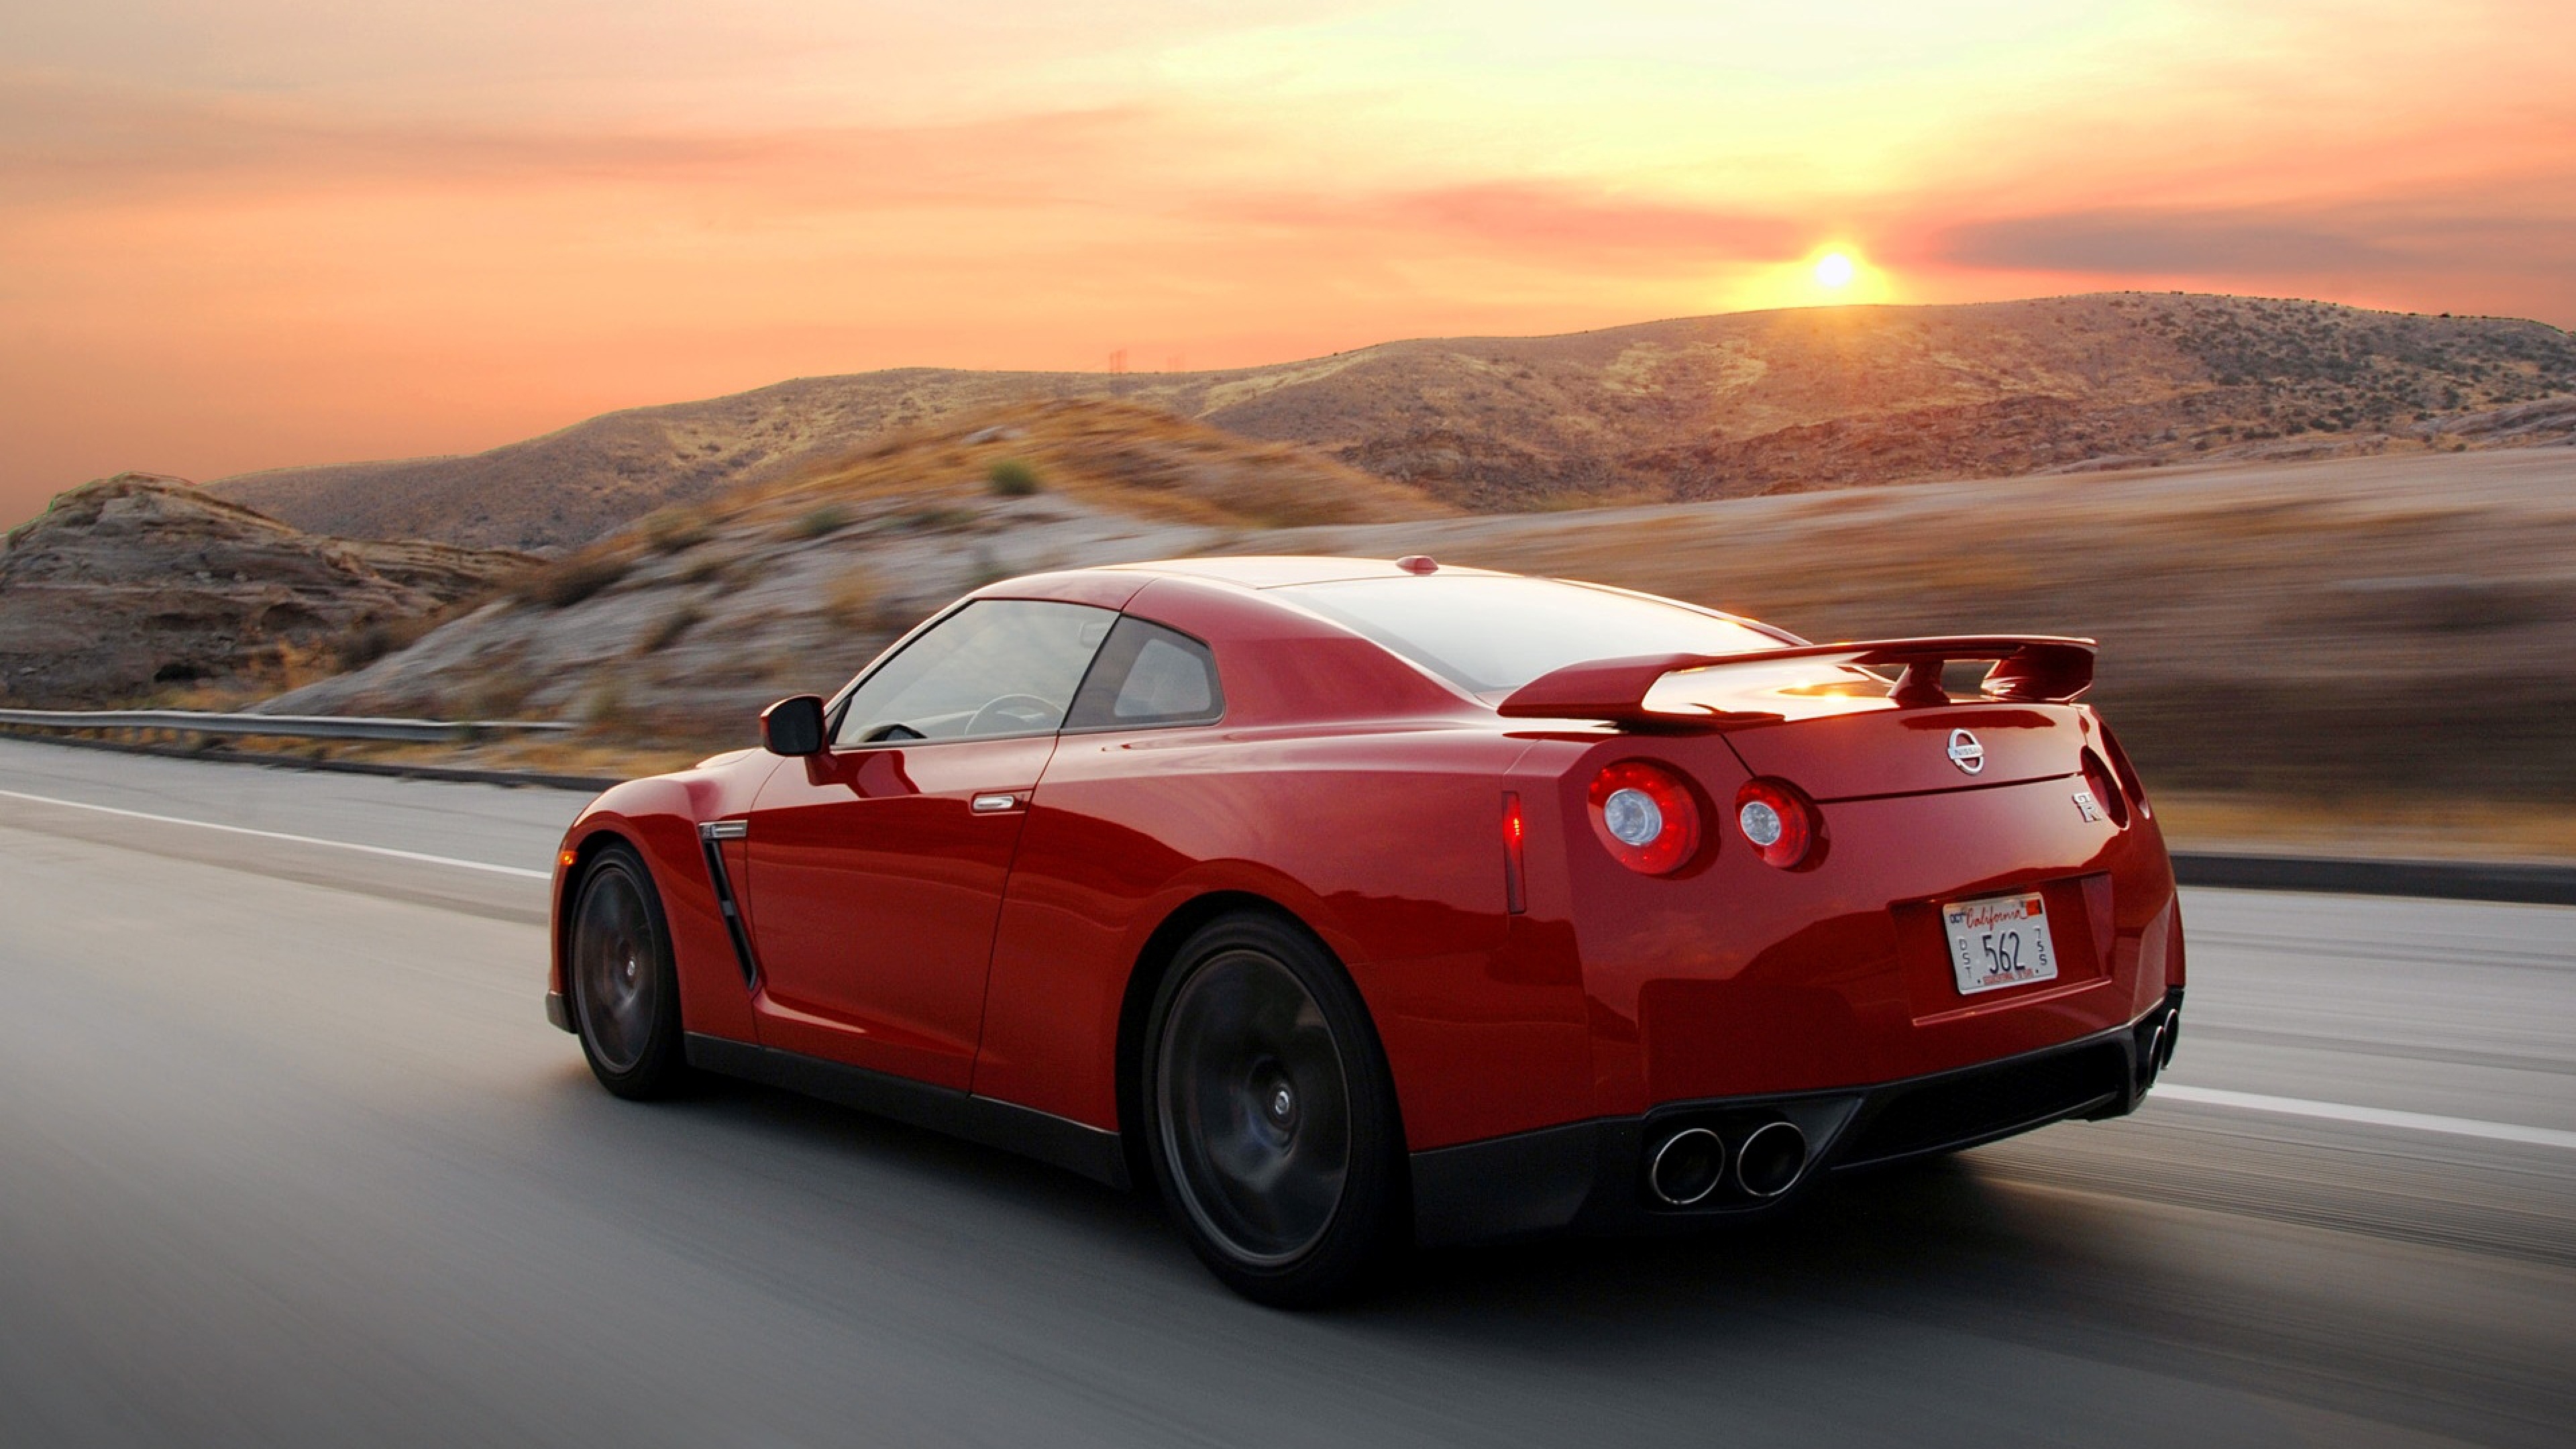 Nissan Red Run Moving Side Wallpaper Background 4k Ultra HD